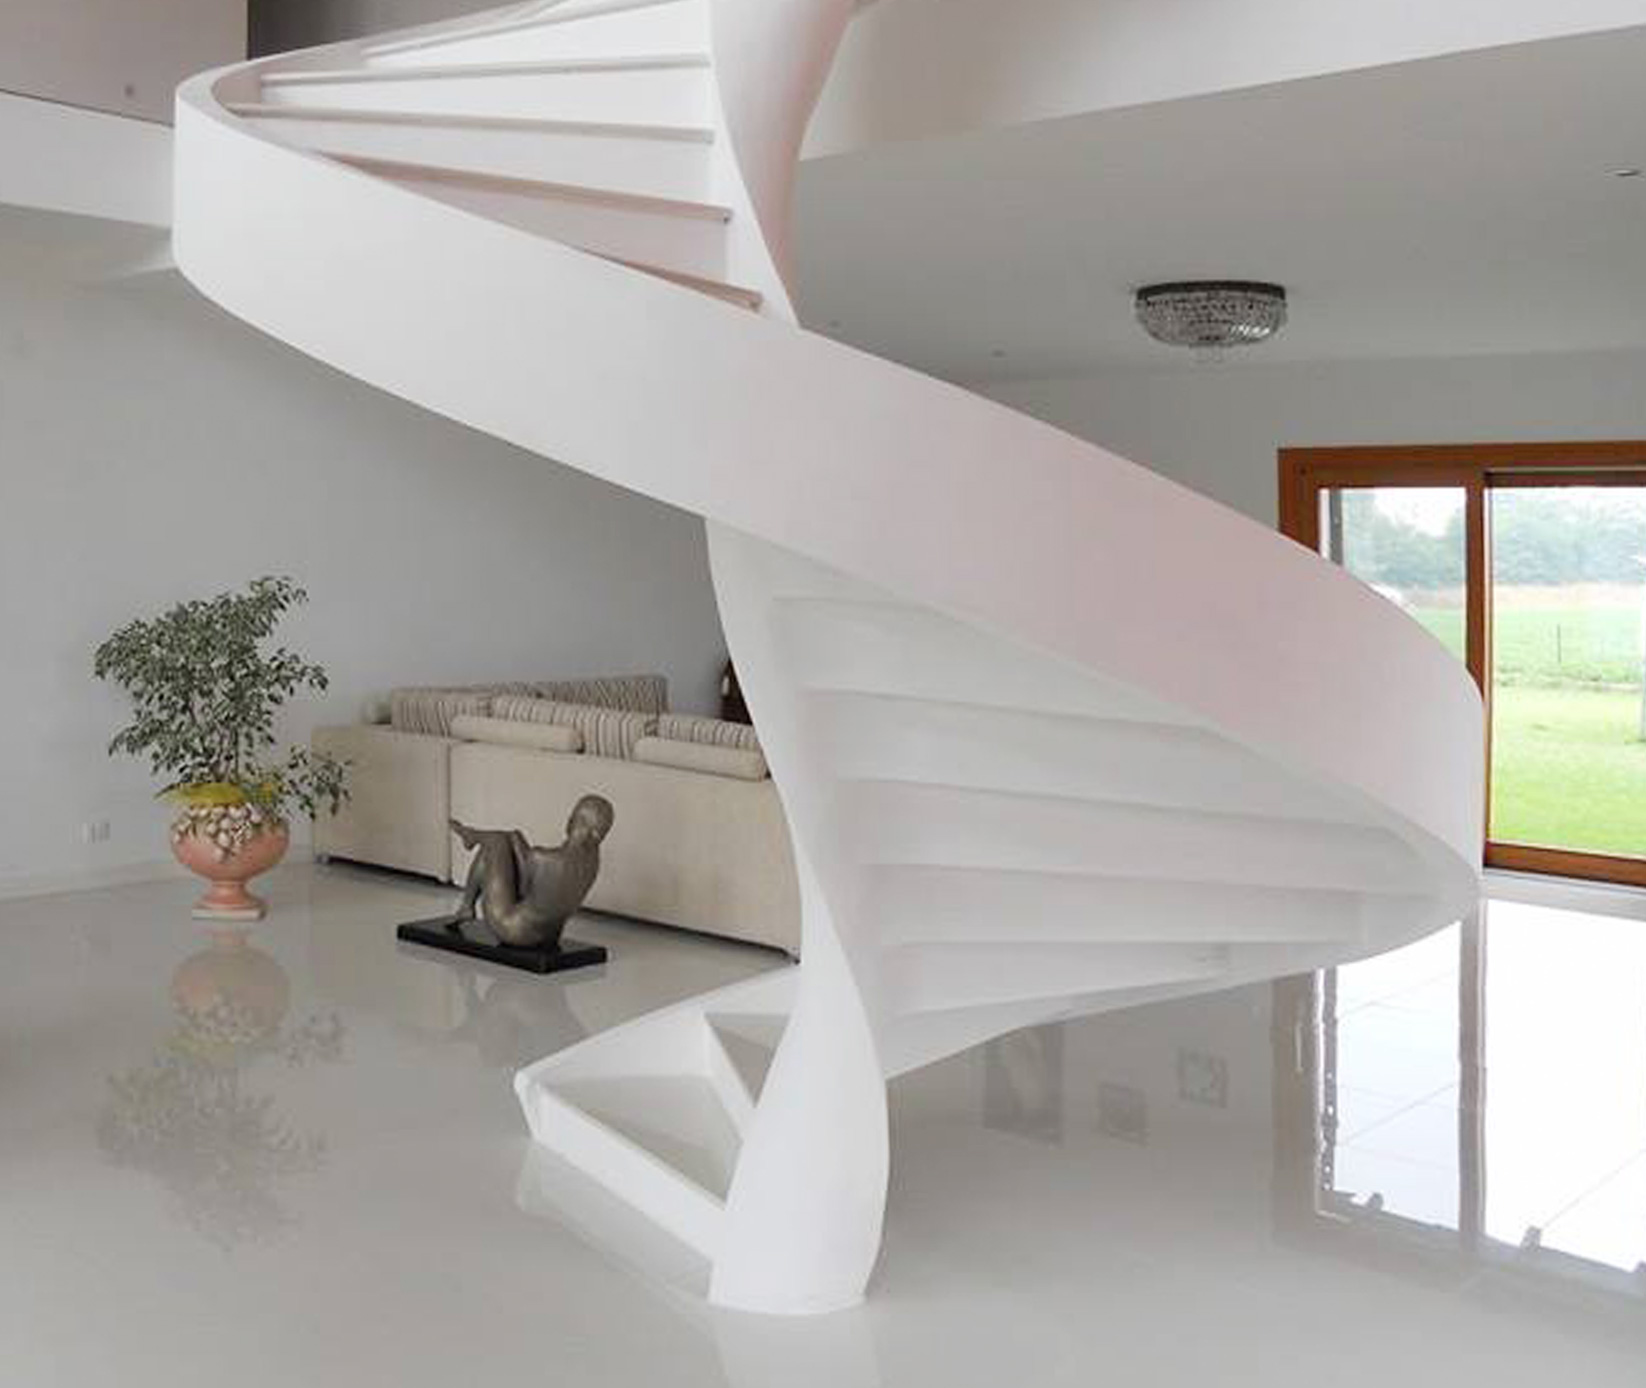 Handcrafted helical staircases